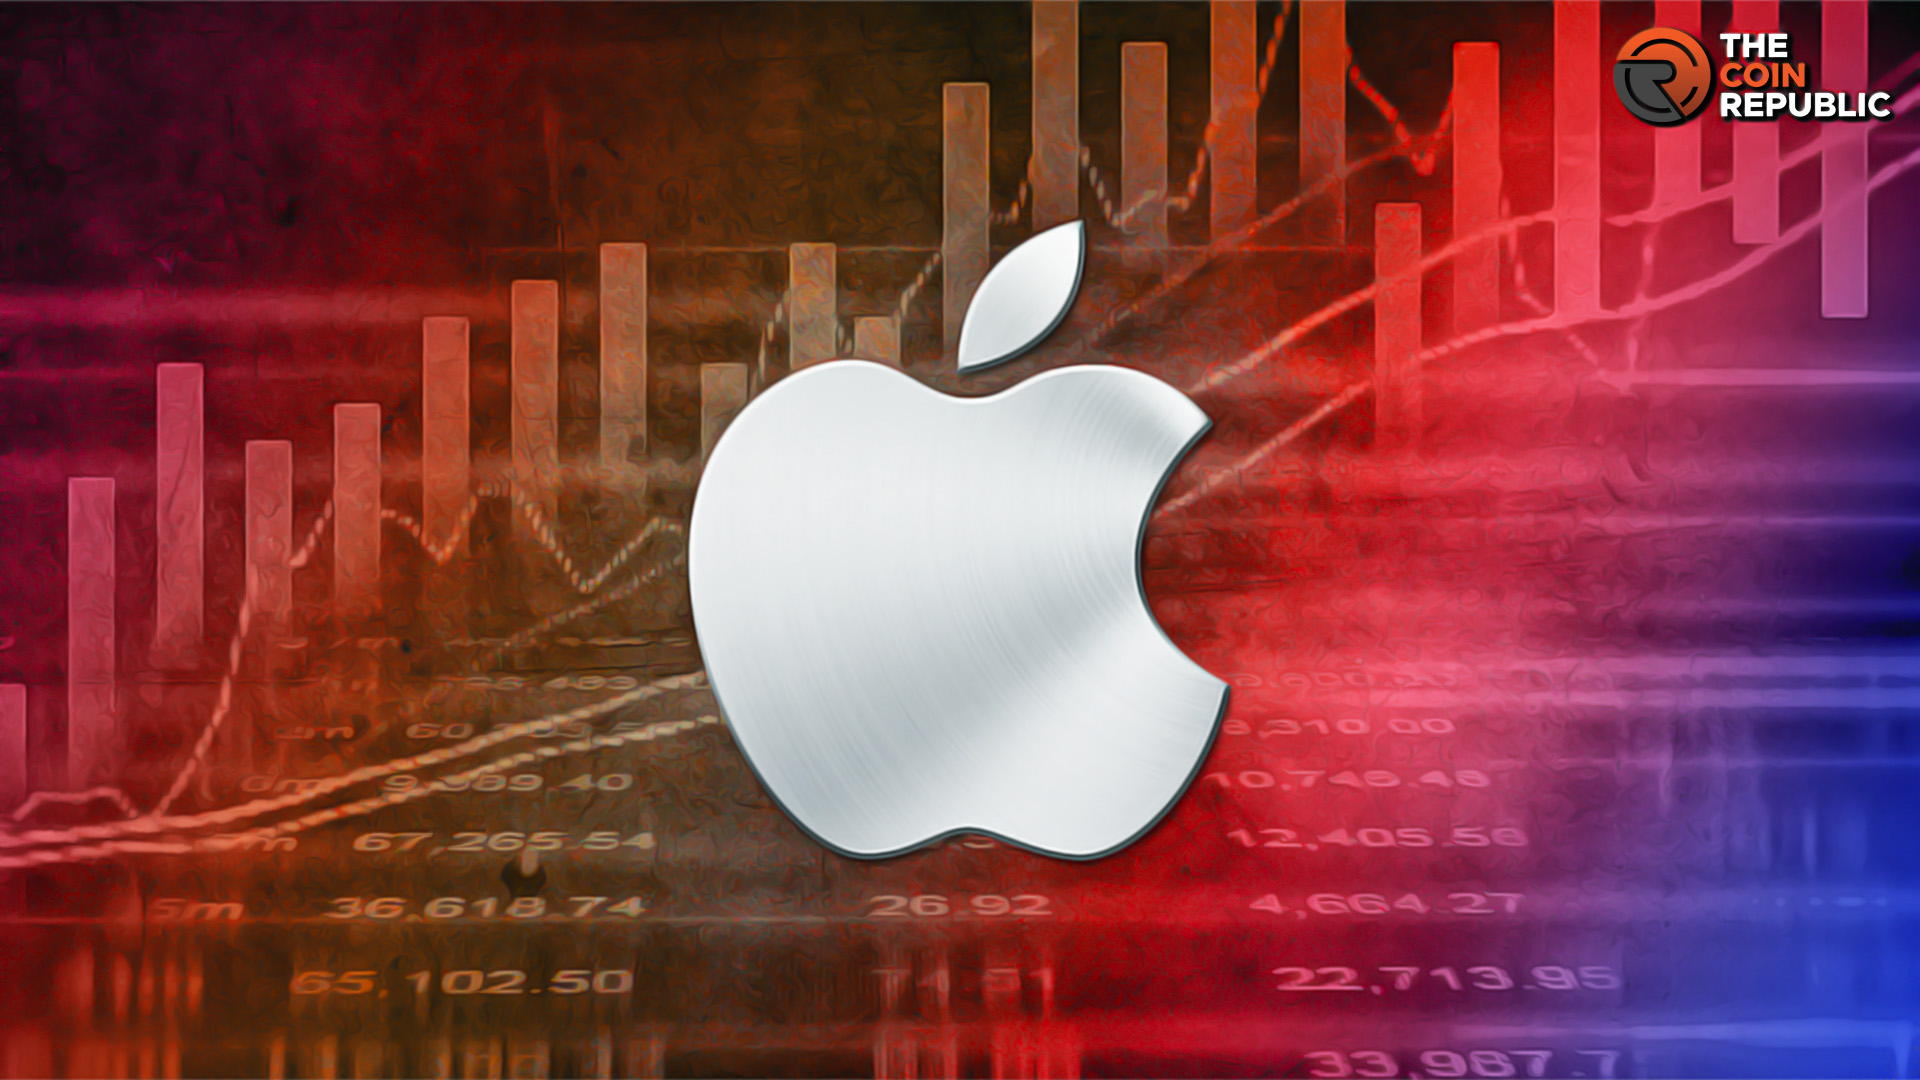 AAPL Stock Price: Bulls Surpassed the 50-day EMA, What’s Ahead?